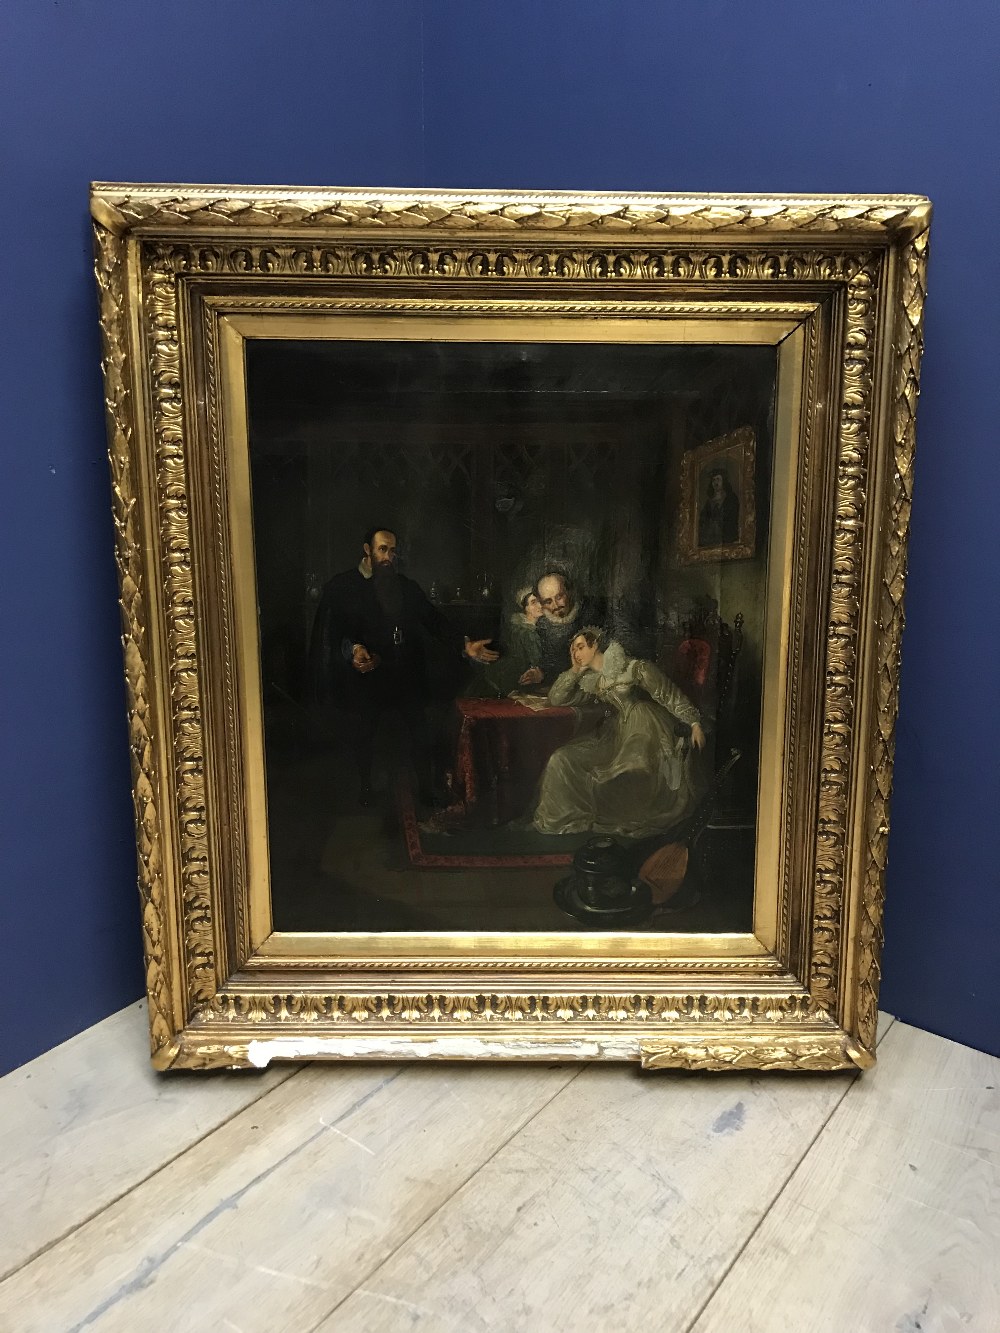 C19th school oil on canvas "The Torment of Mary Queen of Scots" 66 X 57cm in heavy gilt frame